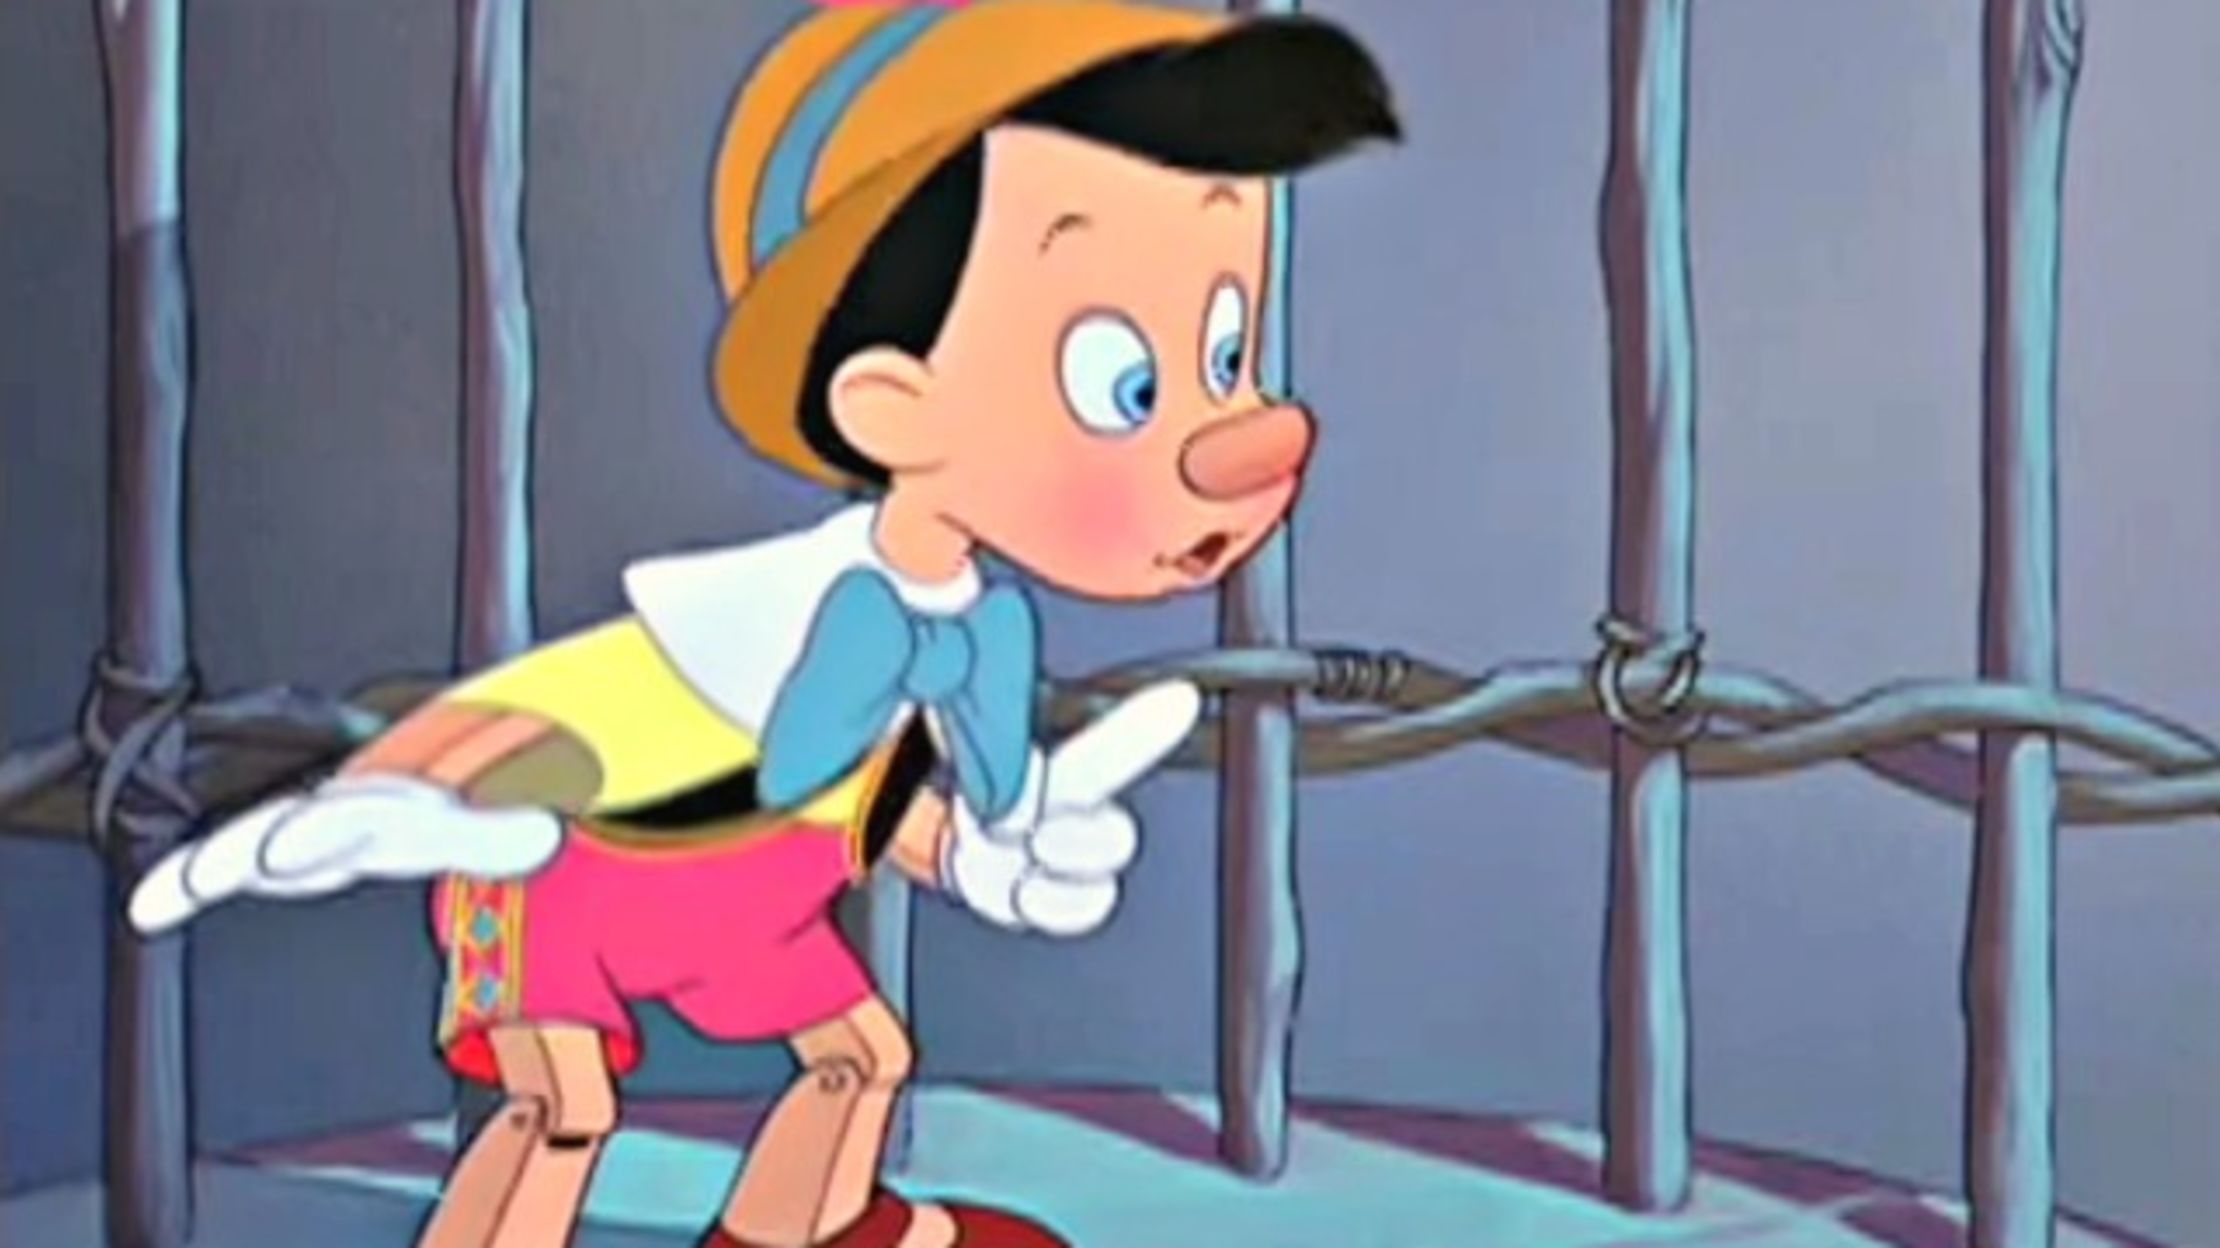 12 Fib Free Facts About Pinocchio Mental Floss